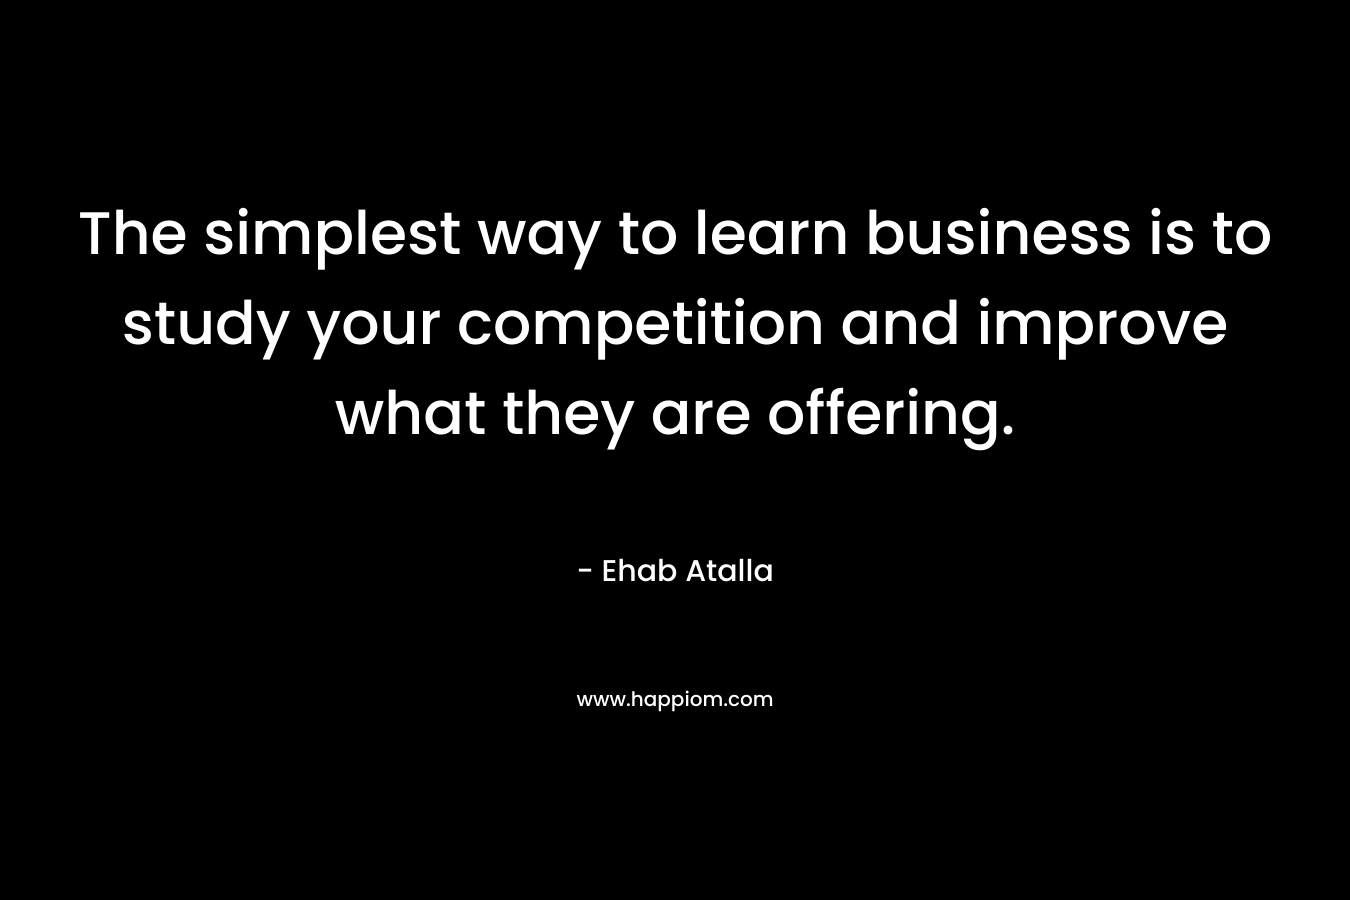 The simplest way to learn business is to study your competition and improve what they are offering.